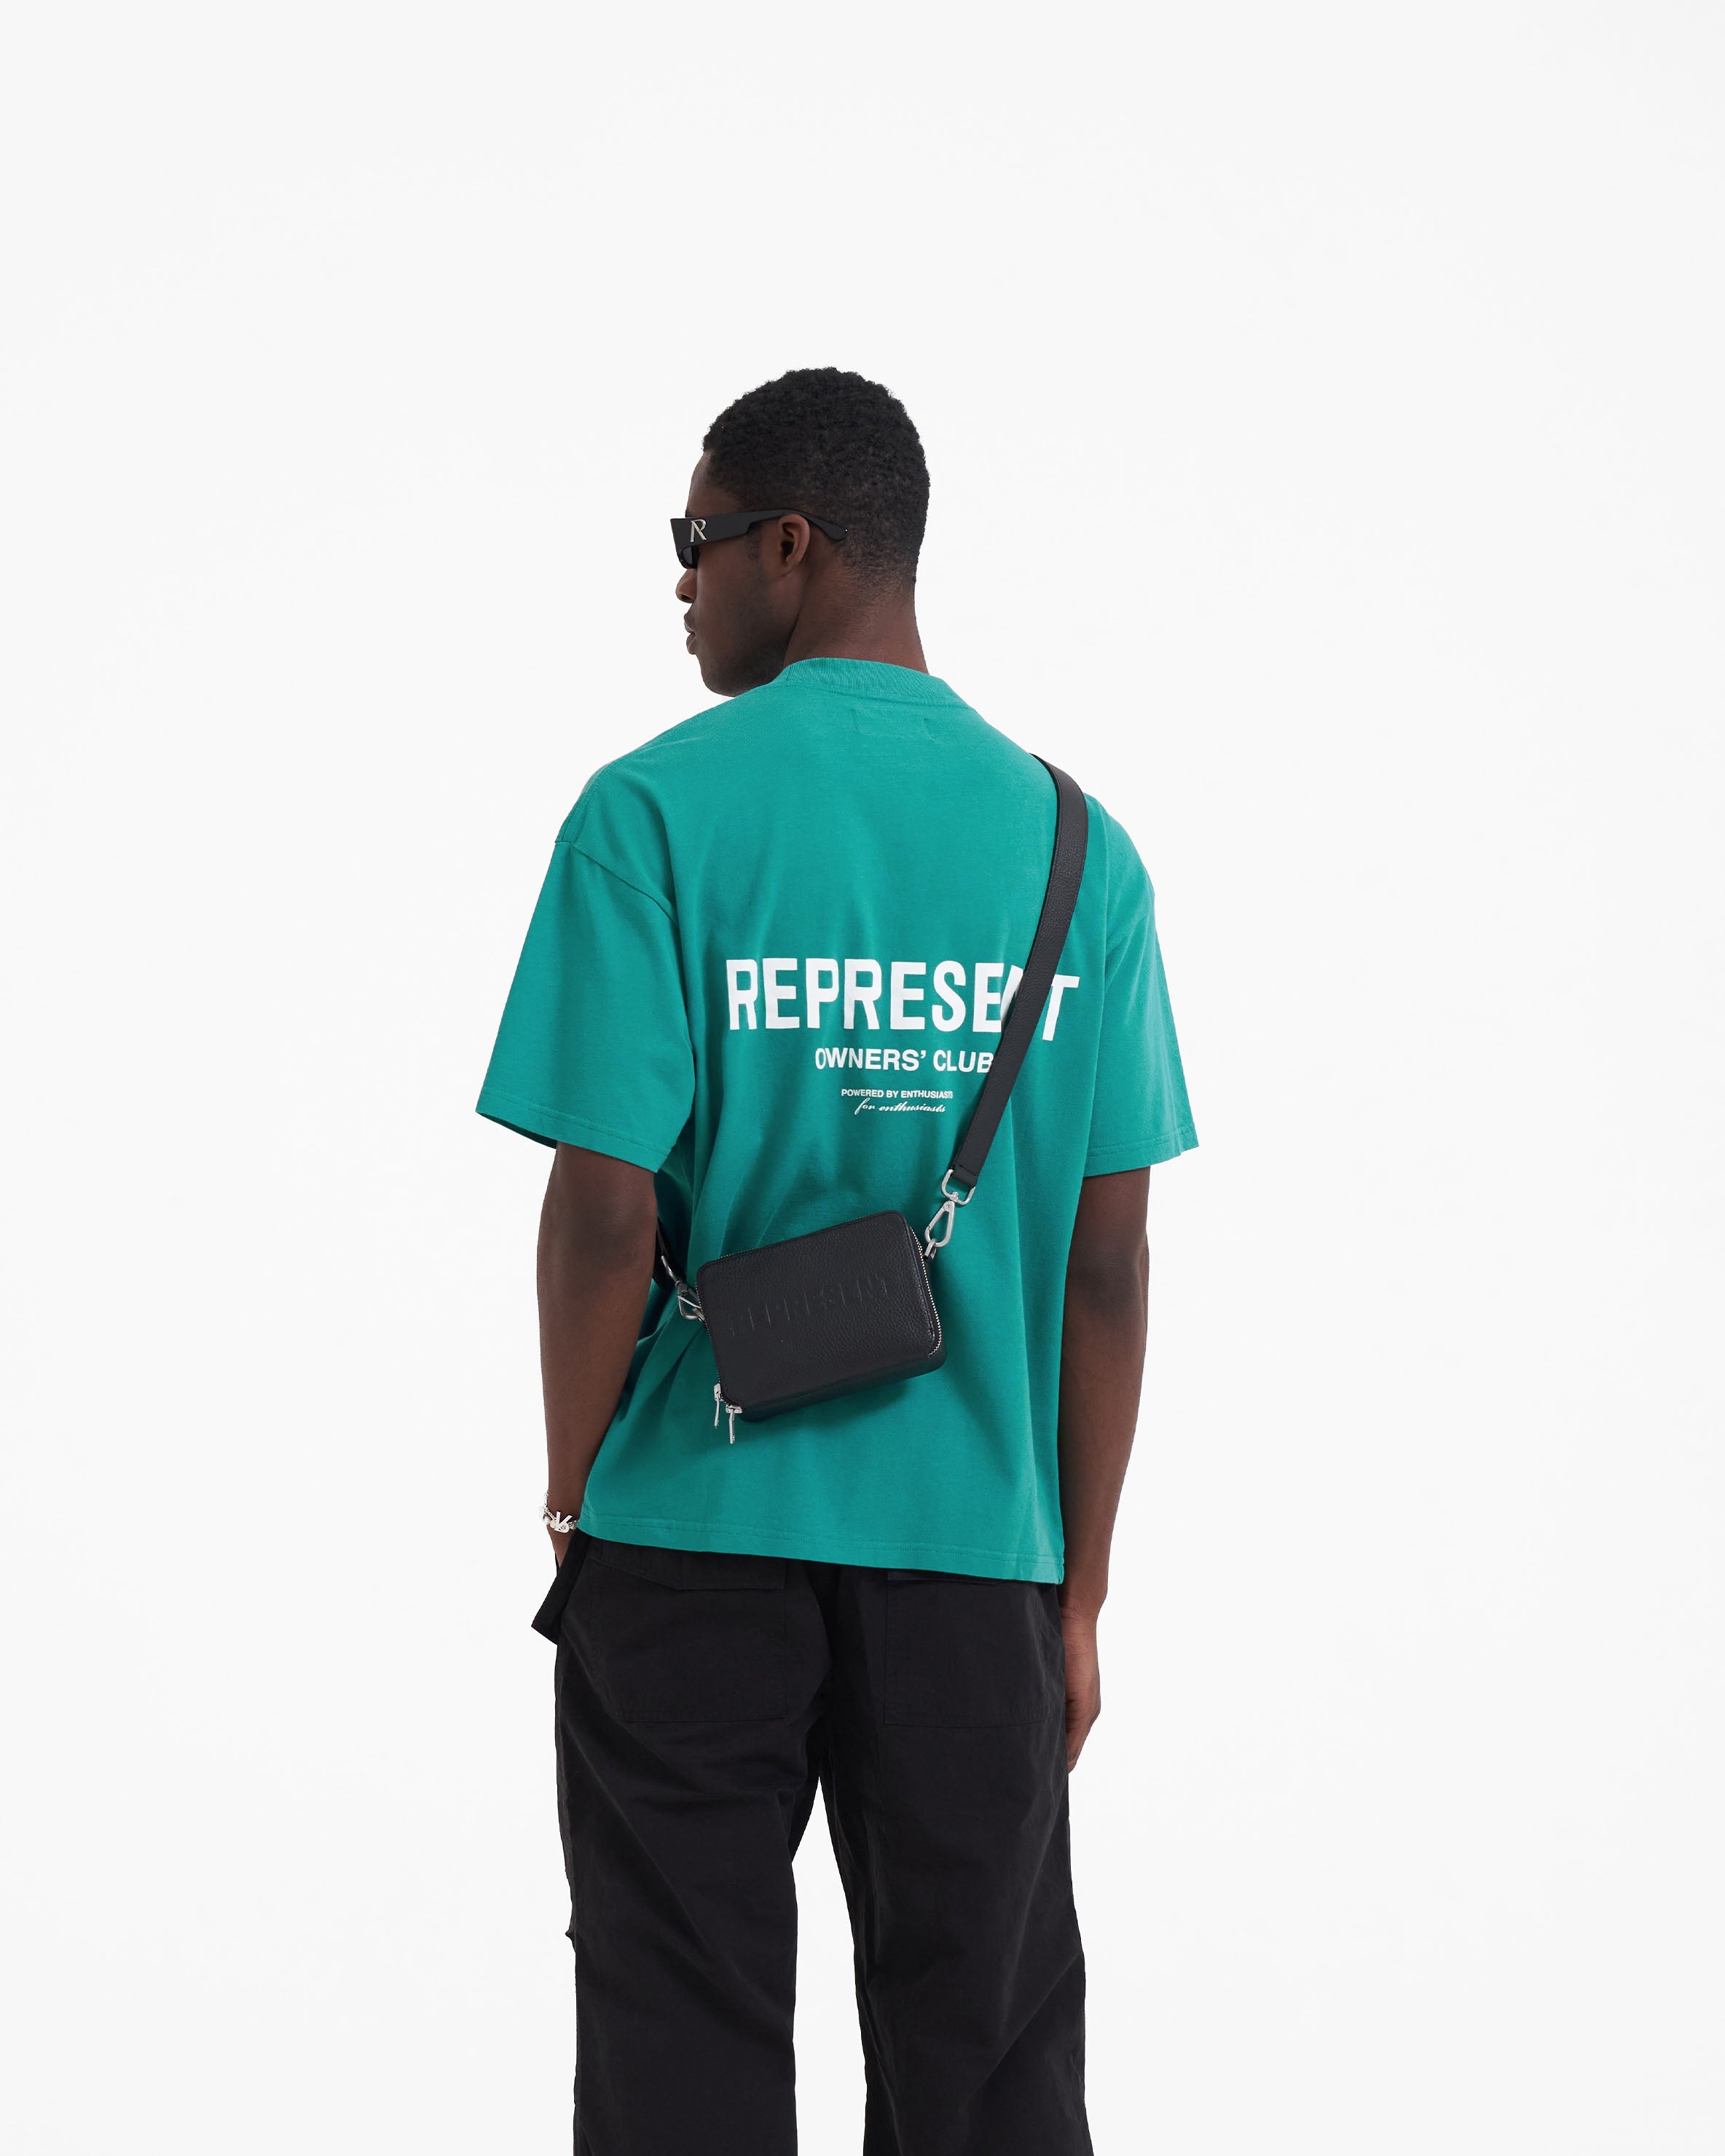 Represent Owners Club T-Shirt - Teal